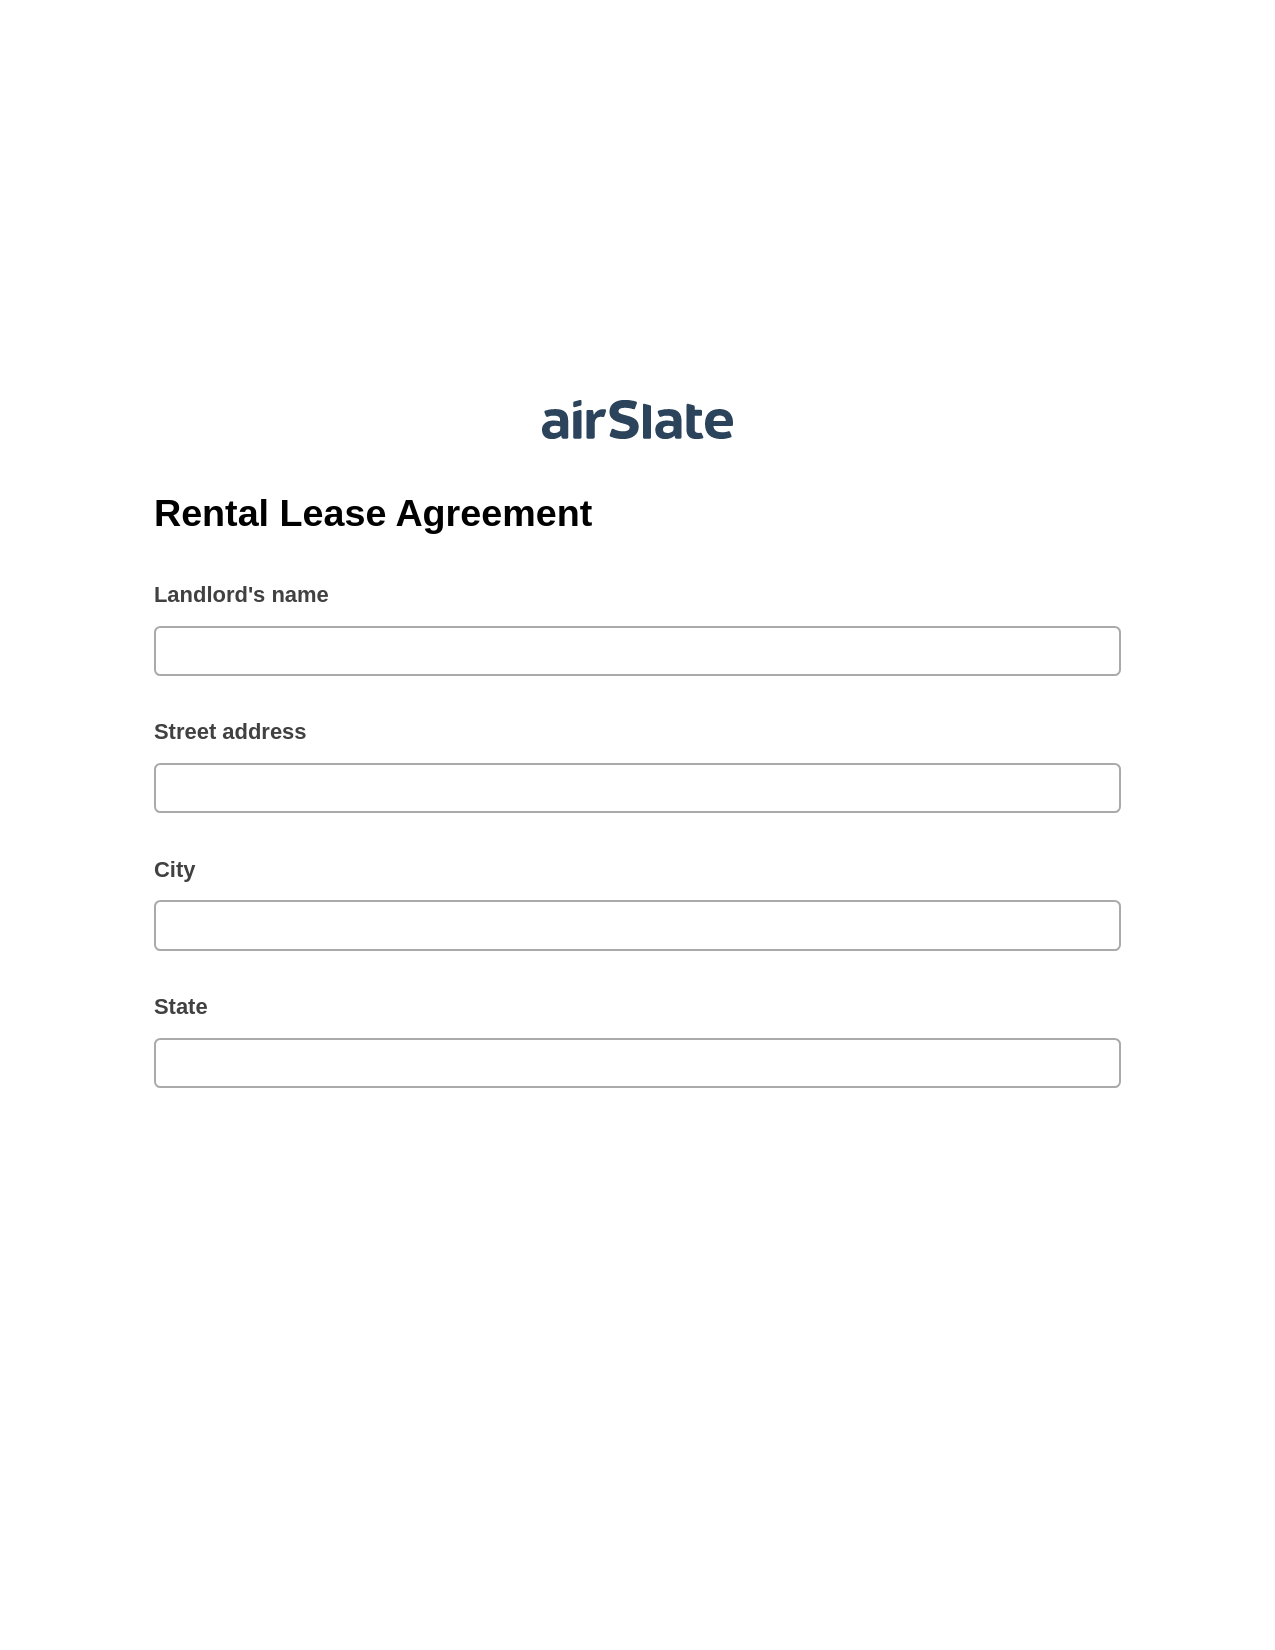 Multirole Rental Lease Agreement Pre-fill from CSV File Bot, Revoke Access Bot, Export to Excel 365 Bot